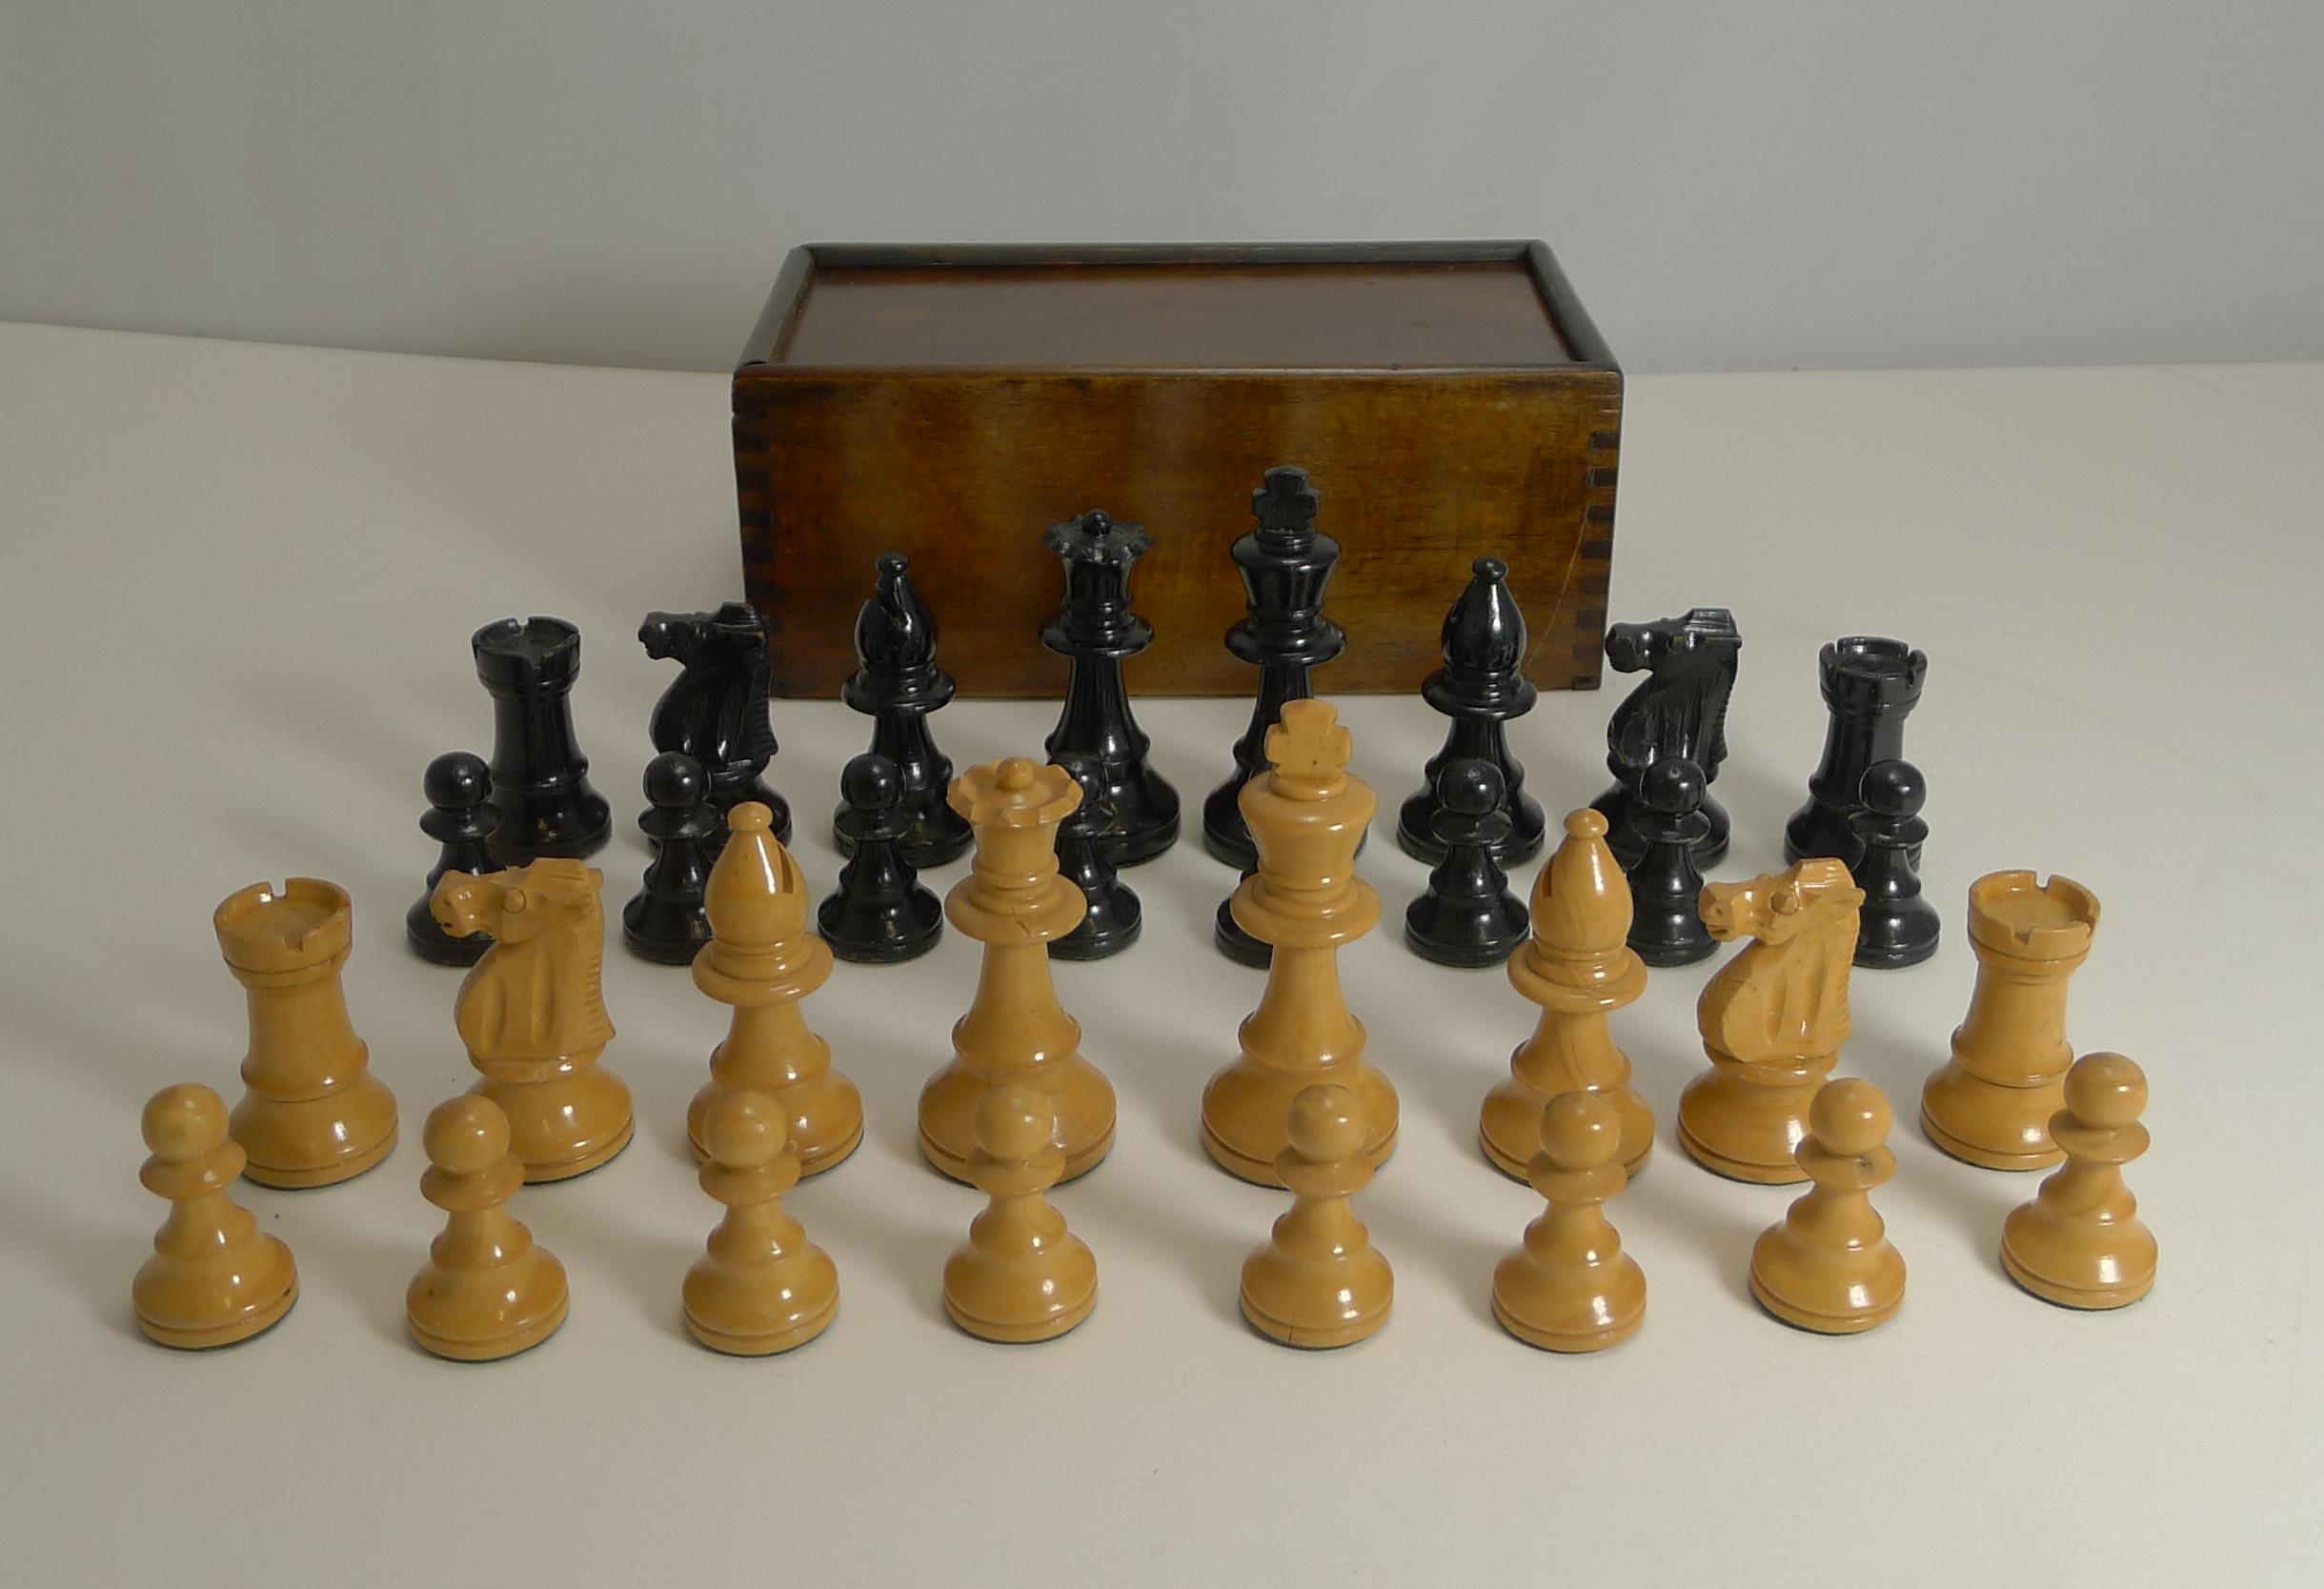 A very smart antique mahogany chess board paired with a boxwood Staunton style chess set inside a wooden storage box.

The board measures 13 1/4